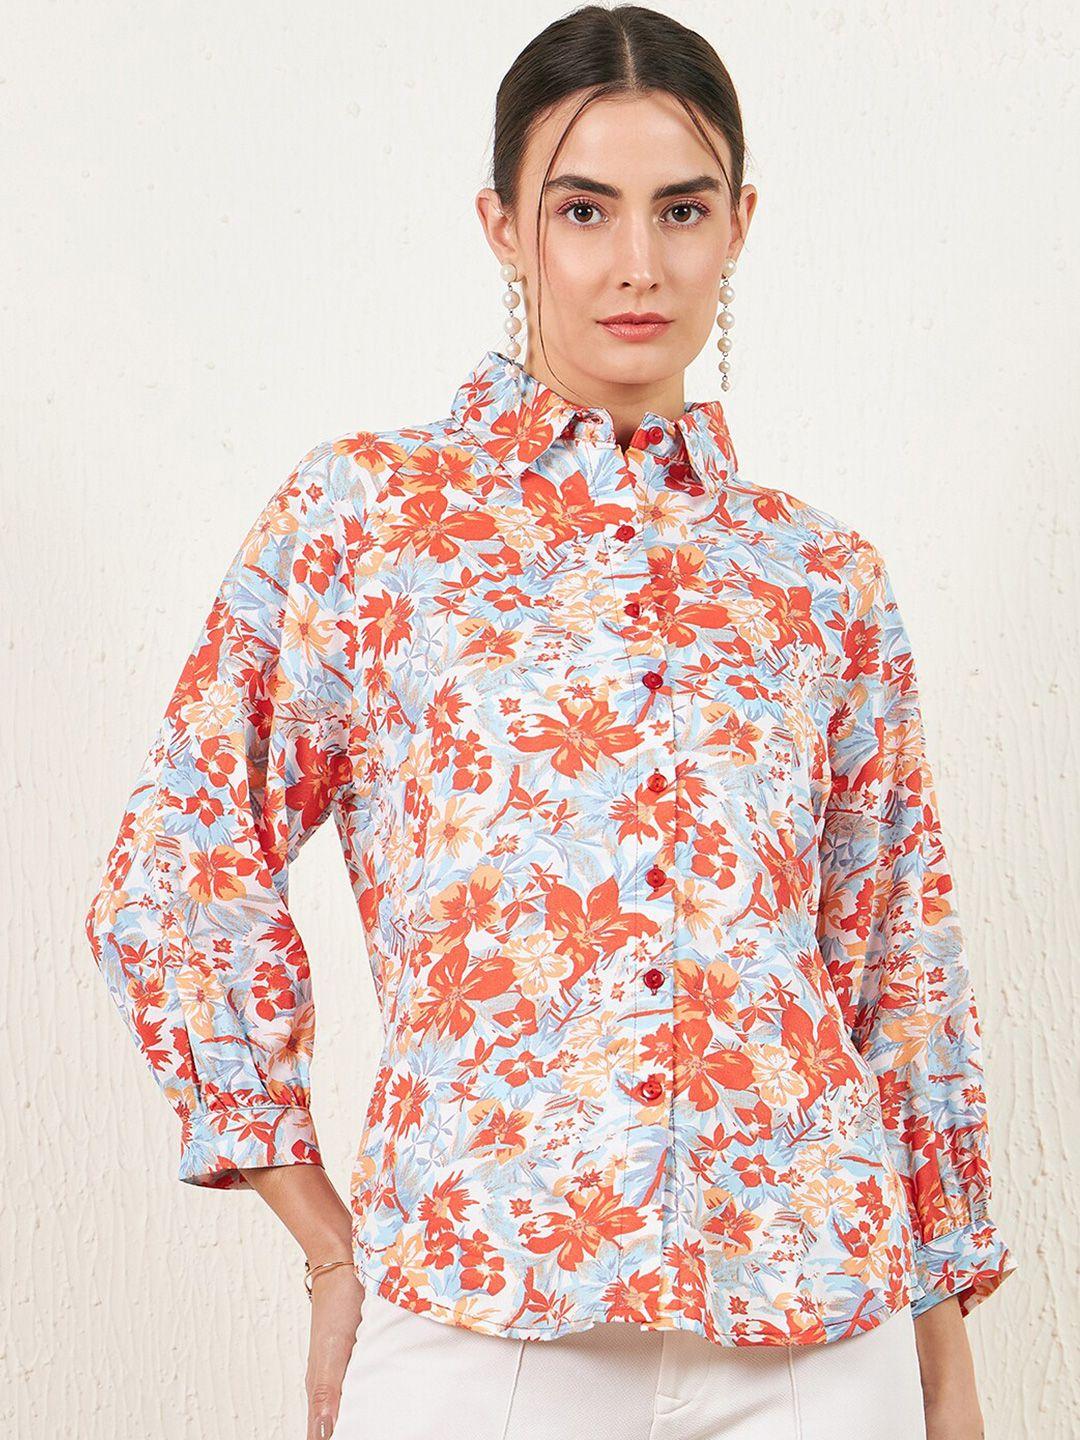 marie claire floral printed casual shirt